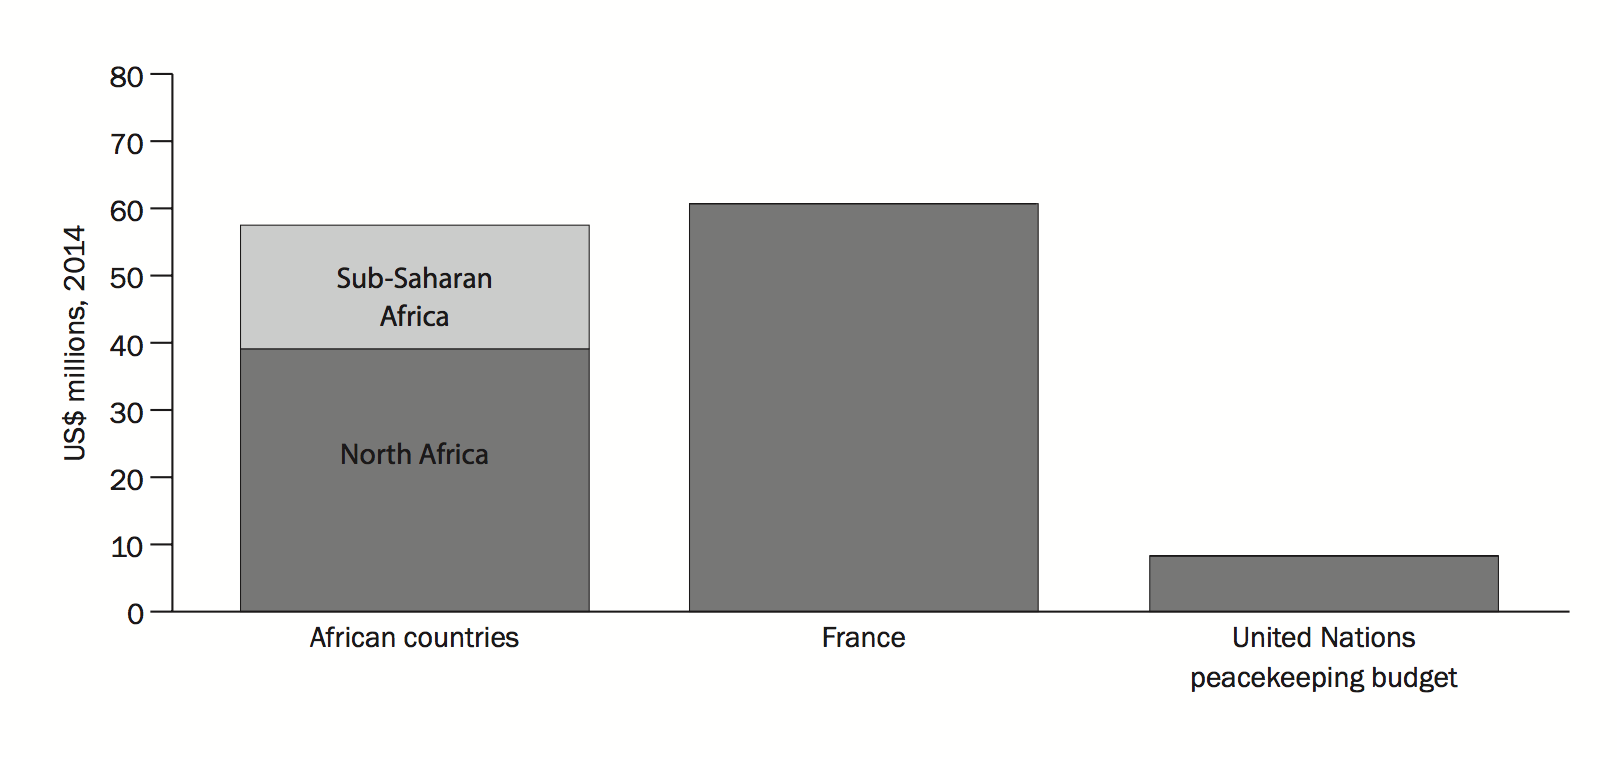 Figure 3. Military expenditure by African countries and France, compared to the United Nations peacekeeping budget, 2015.